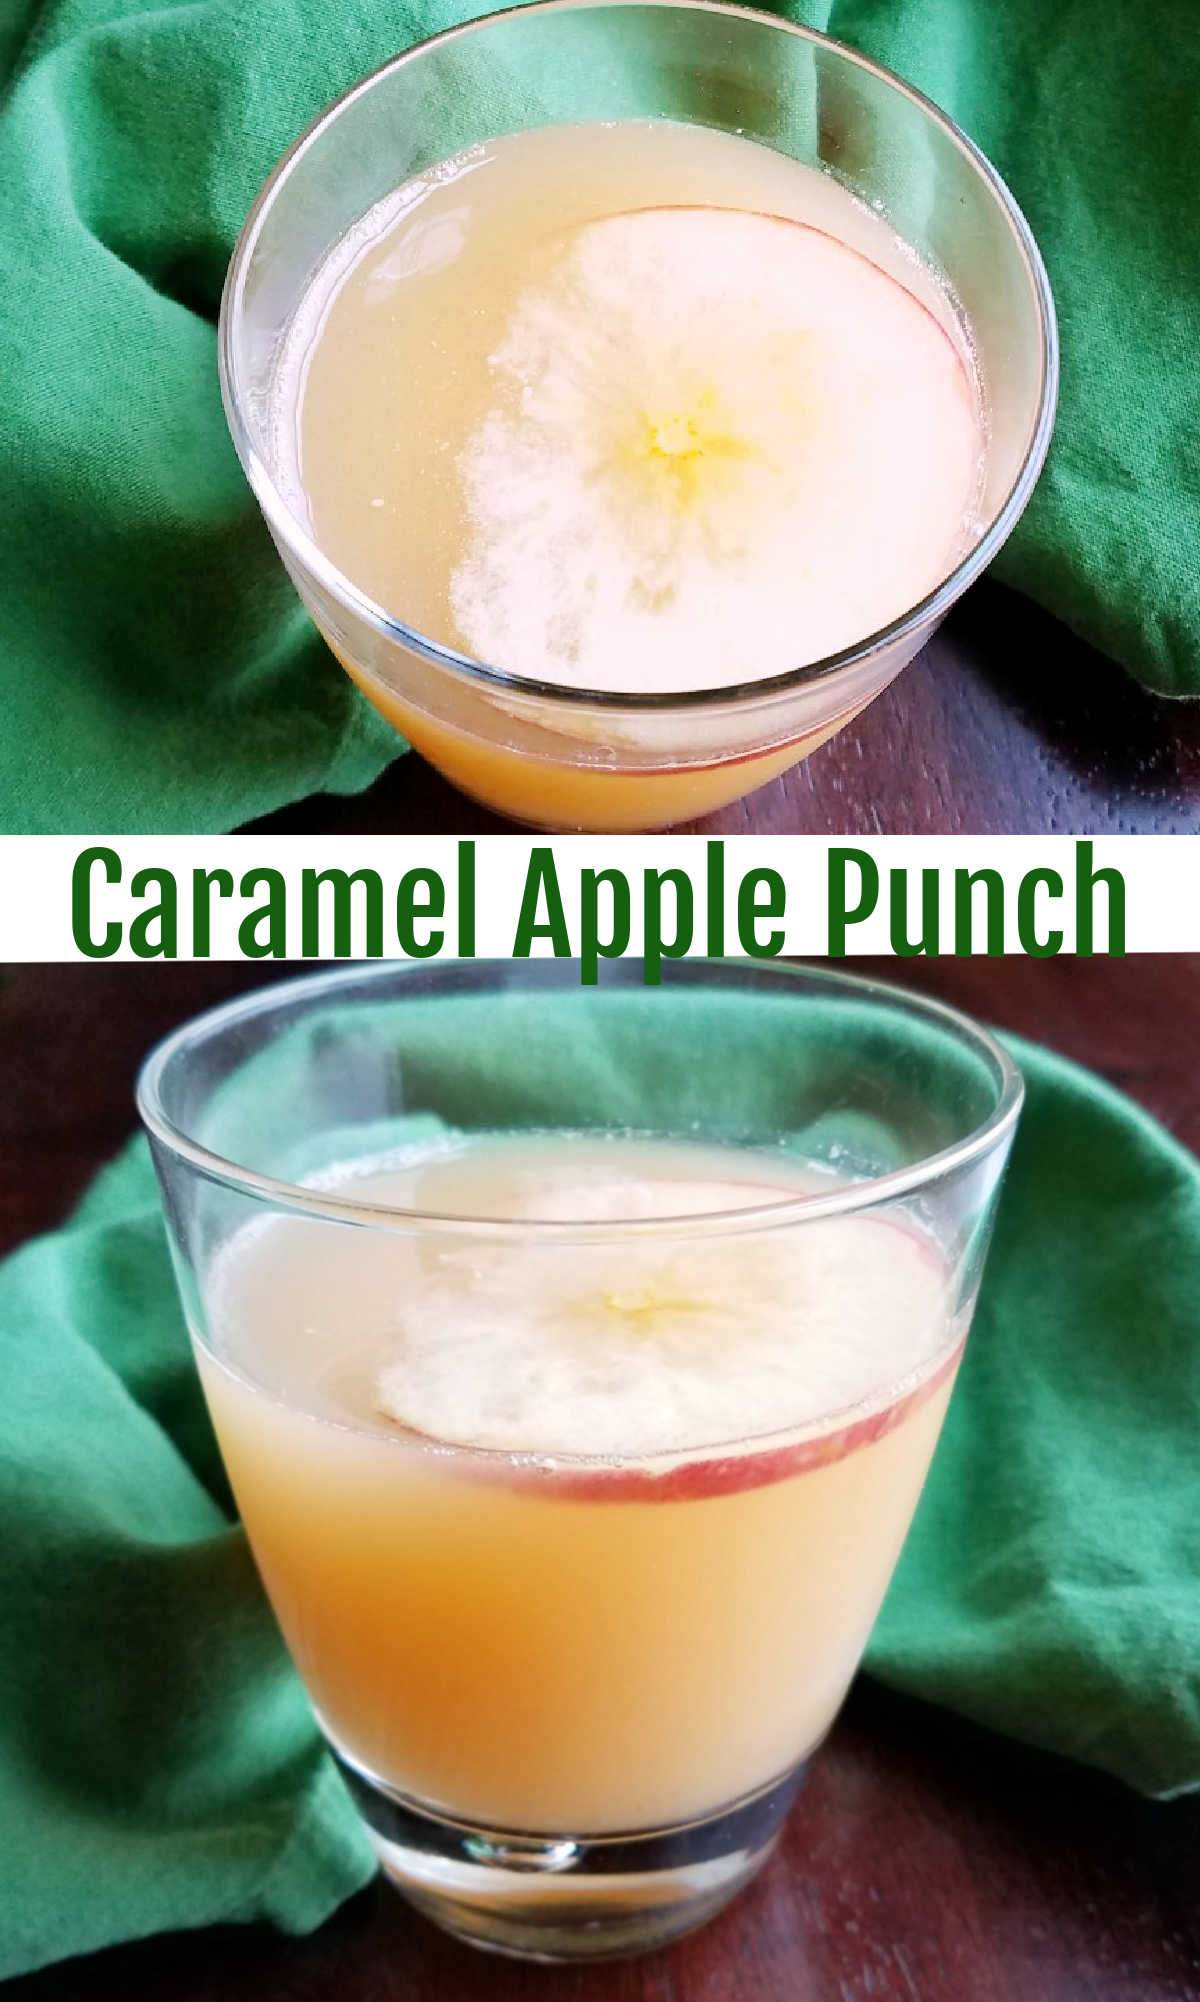  If you are throwing a fall get together, this really simple punch is a must.  You can throw it together in just a few minutes, it tastes like a million bucks and the leftovers keep well too.  It is a perfect way to quench your thirst and delight your guests as well.